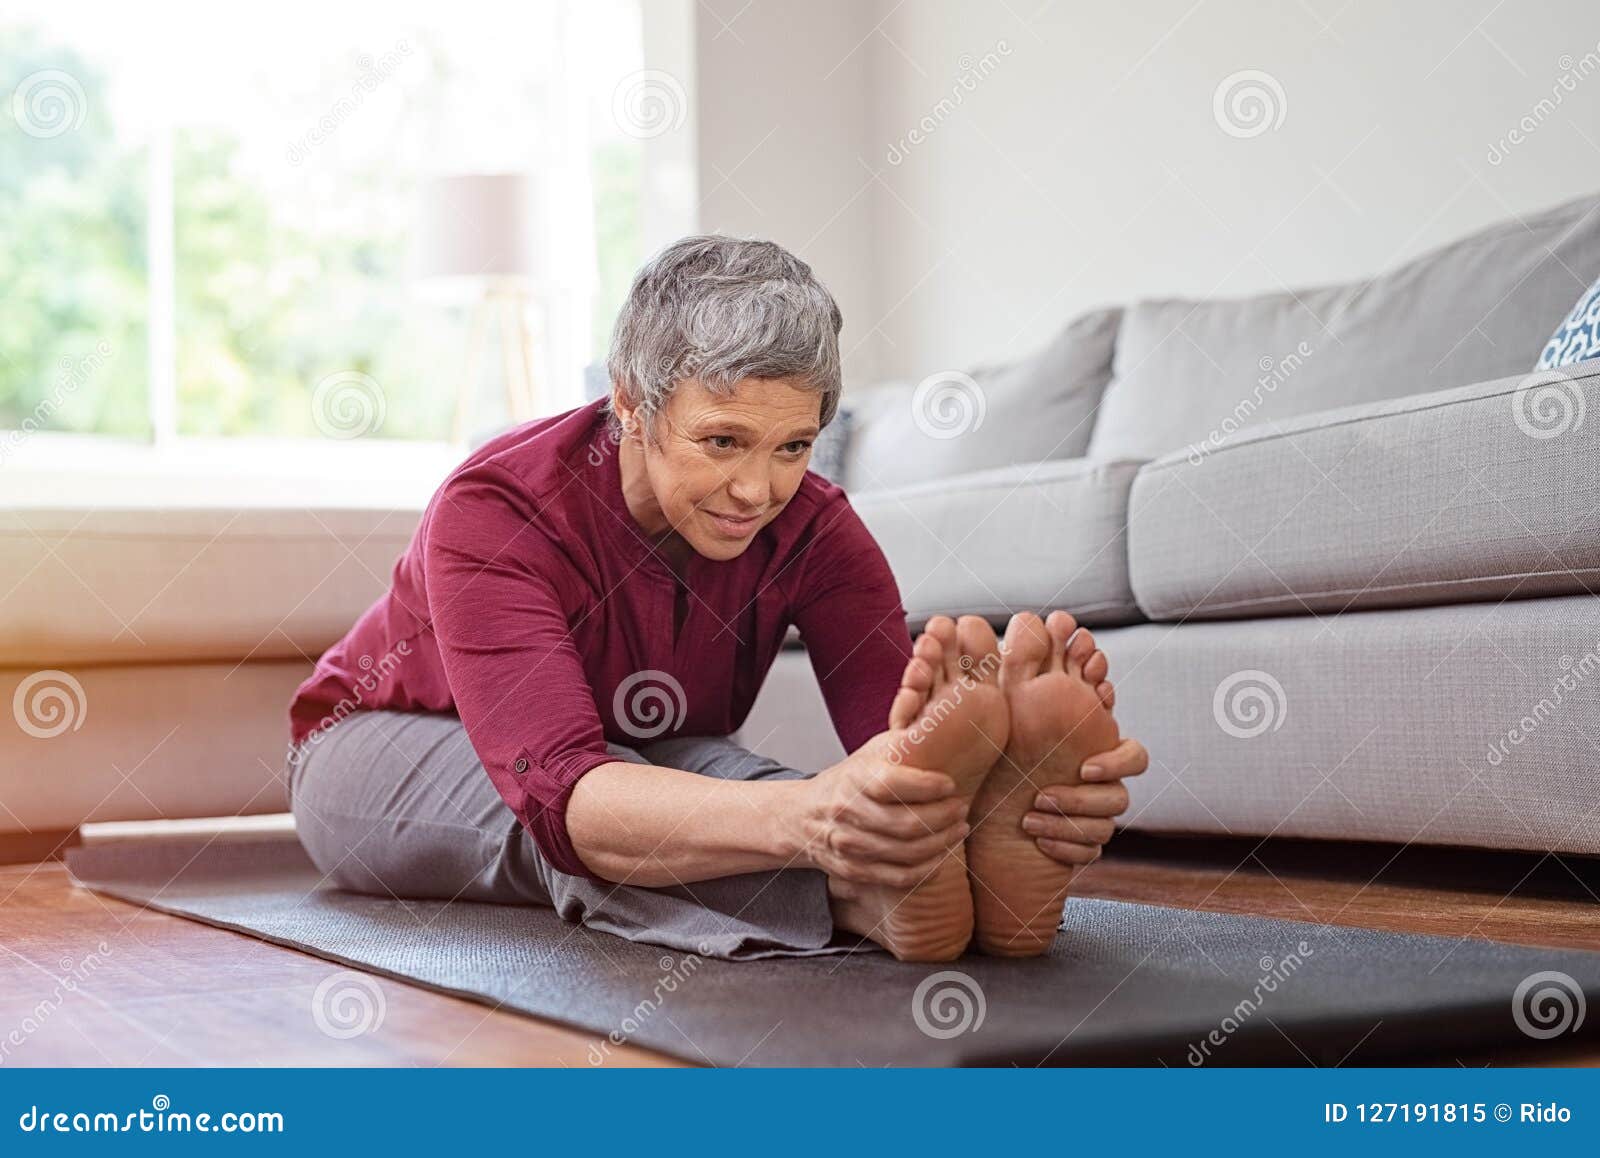 Mature Woman Doing Yoga Exercise At Home Stock Image Image Of